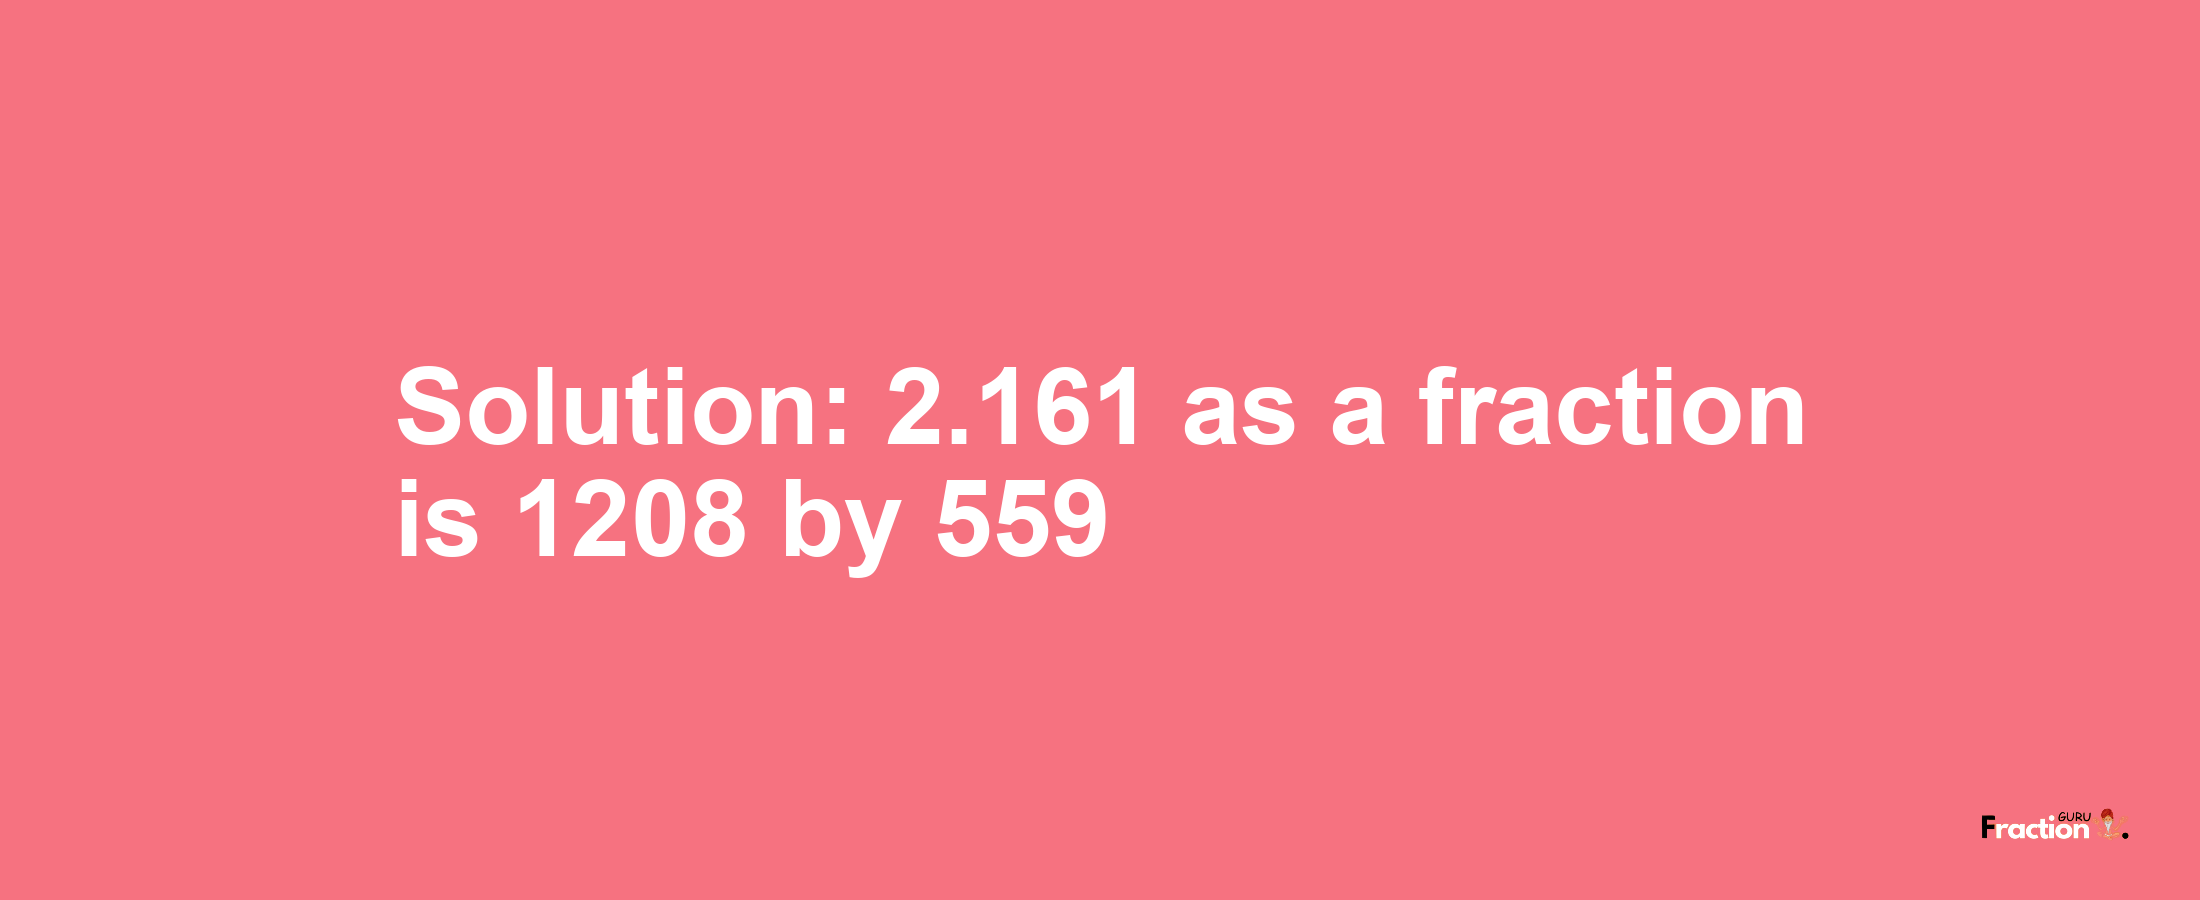 Solution:2.161 as a fraction is 1208/559